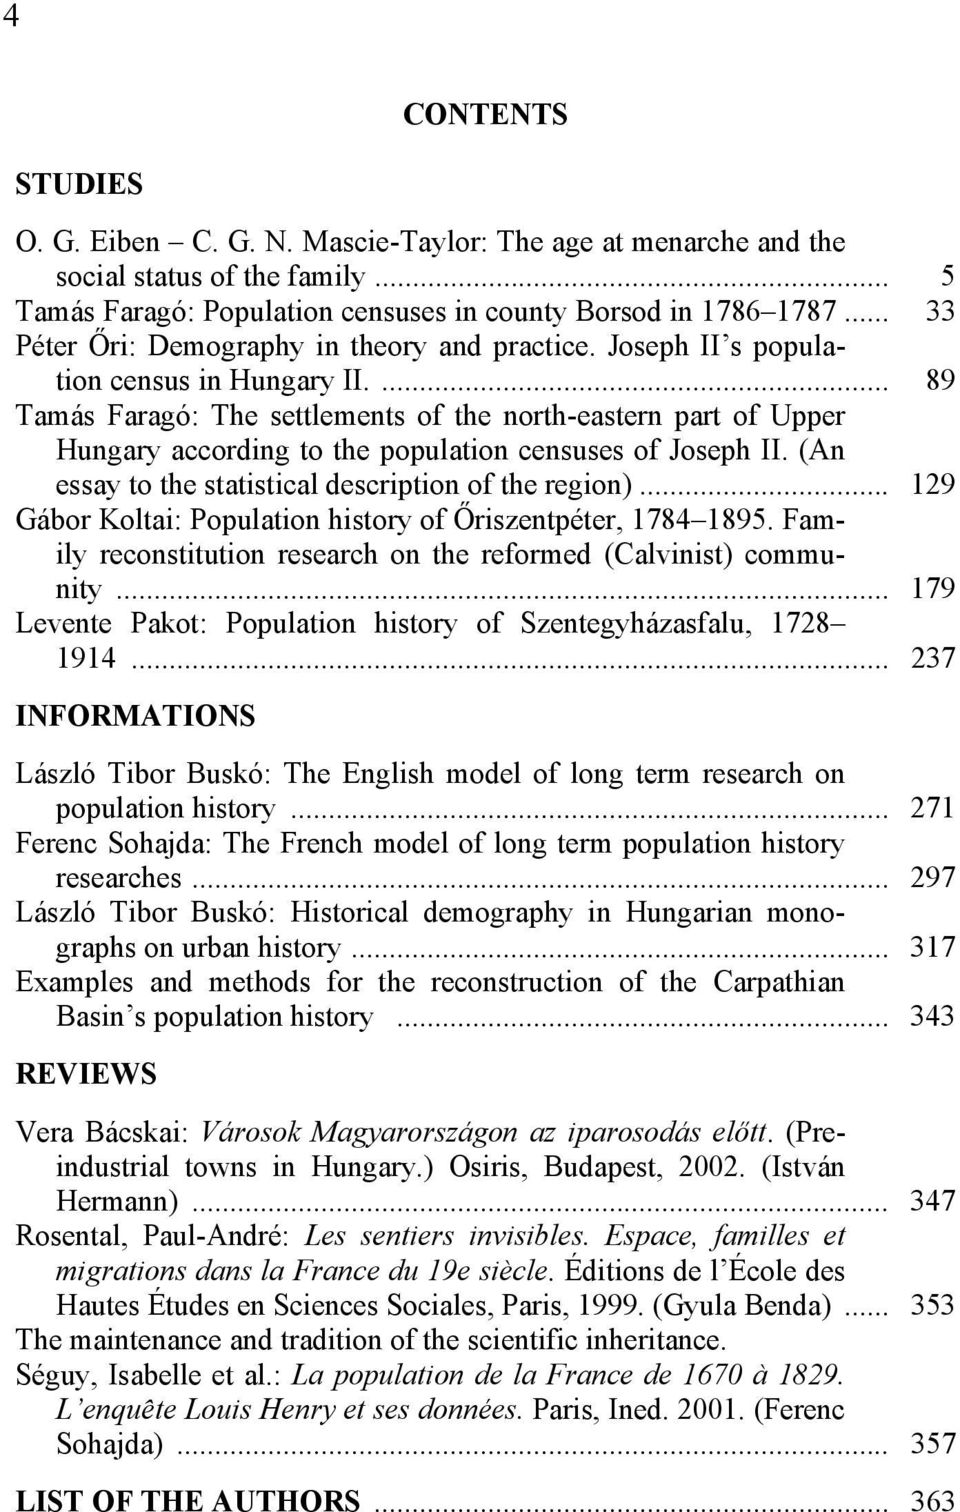 ... 89 Tamás Faragó: The settlements of the north-eastern part of Upper Hungary according to the population censuses of Joseph II. (An essay to the statistical description of the region).